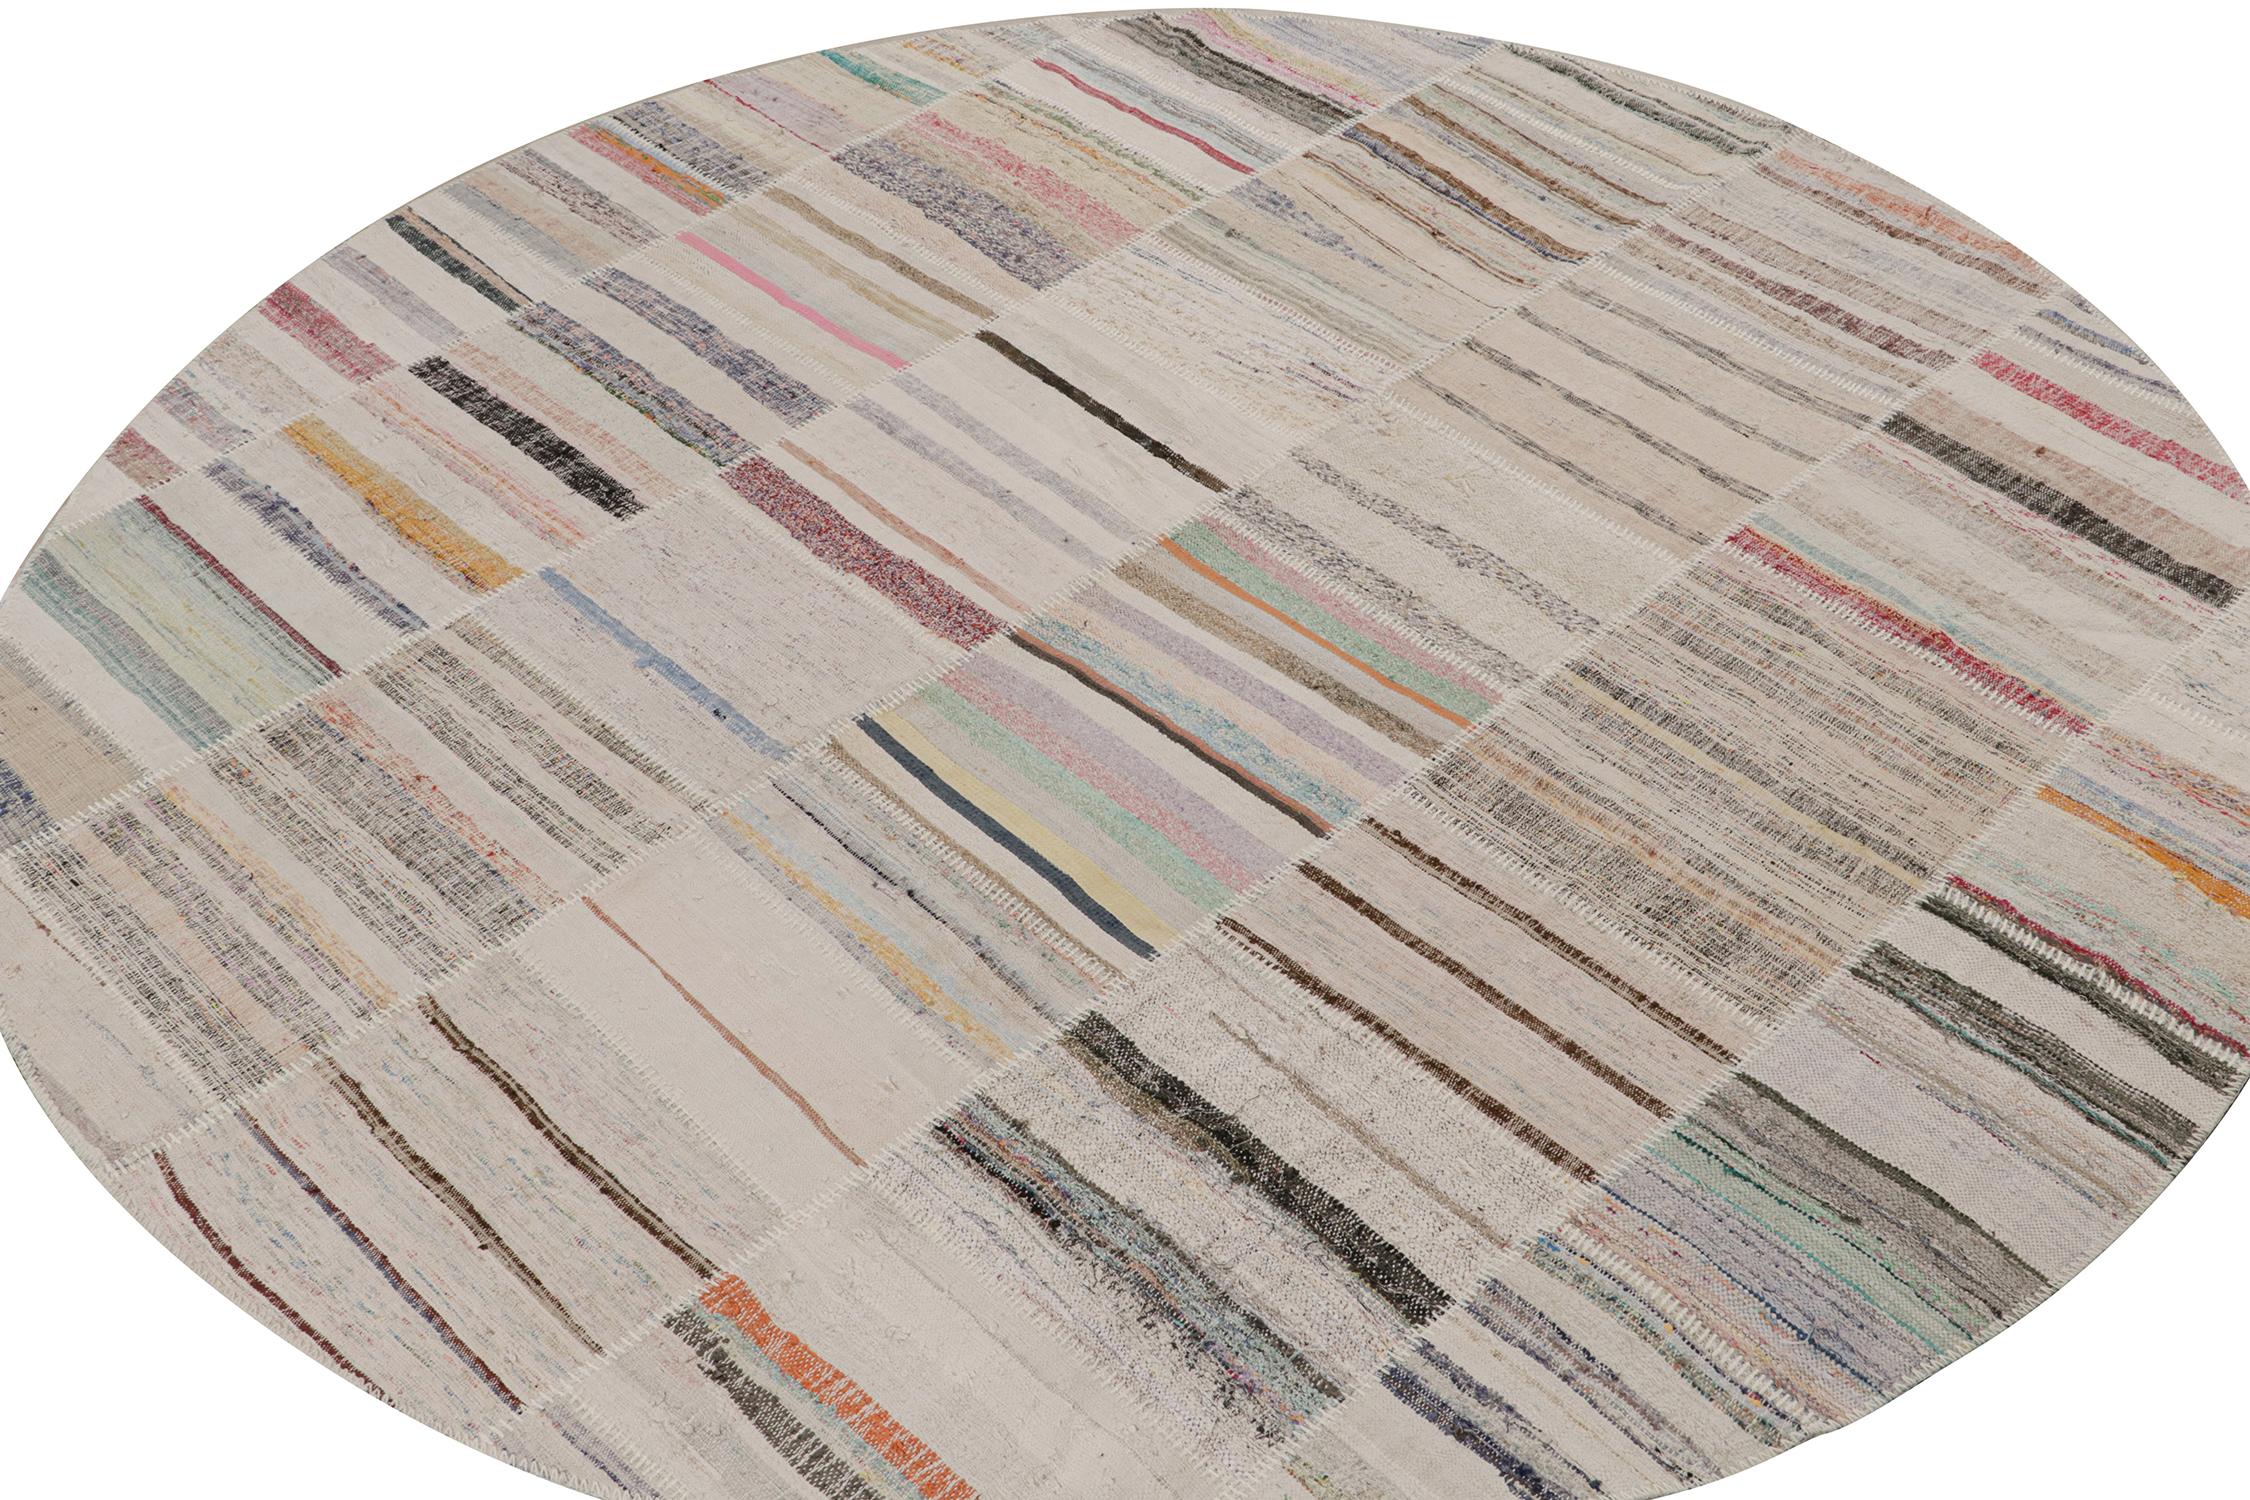 Rug & Kilim presents a contemporary 10’ circle rug from their innovative new patchwork kilim collection. 

On the design: 

This flat weave technique repurposes vintage yarns in polychromatic stripes and striae, achieving a playful look with